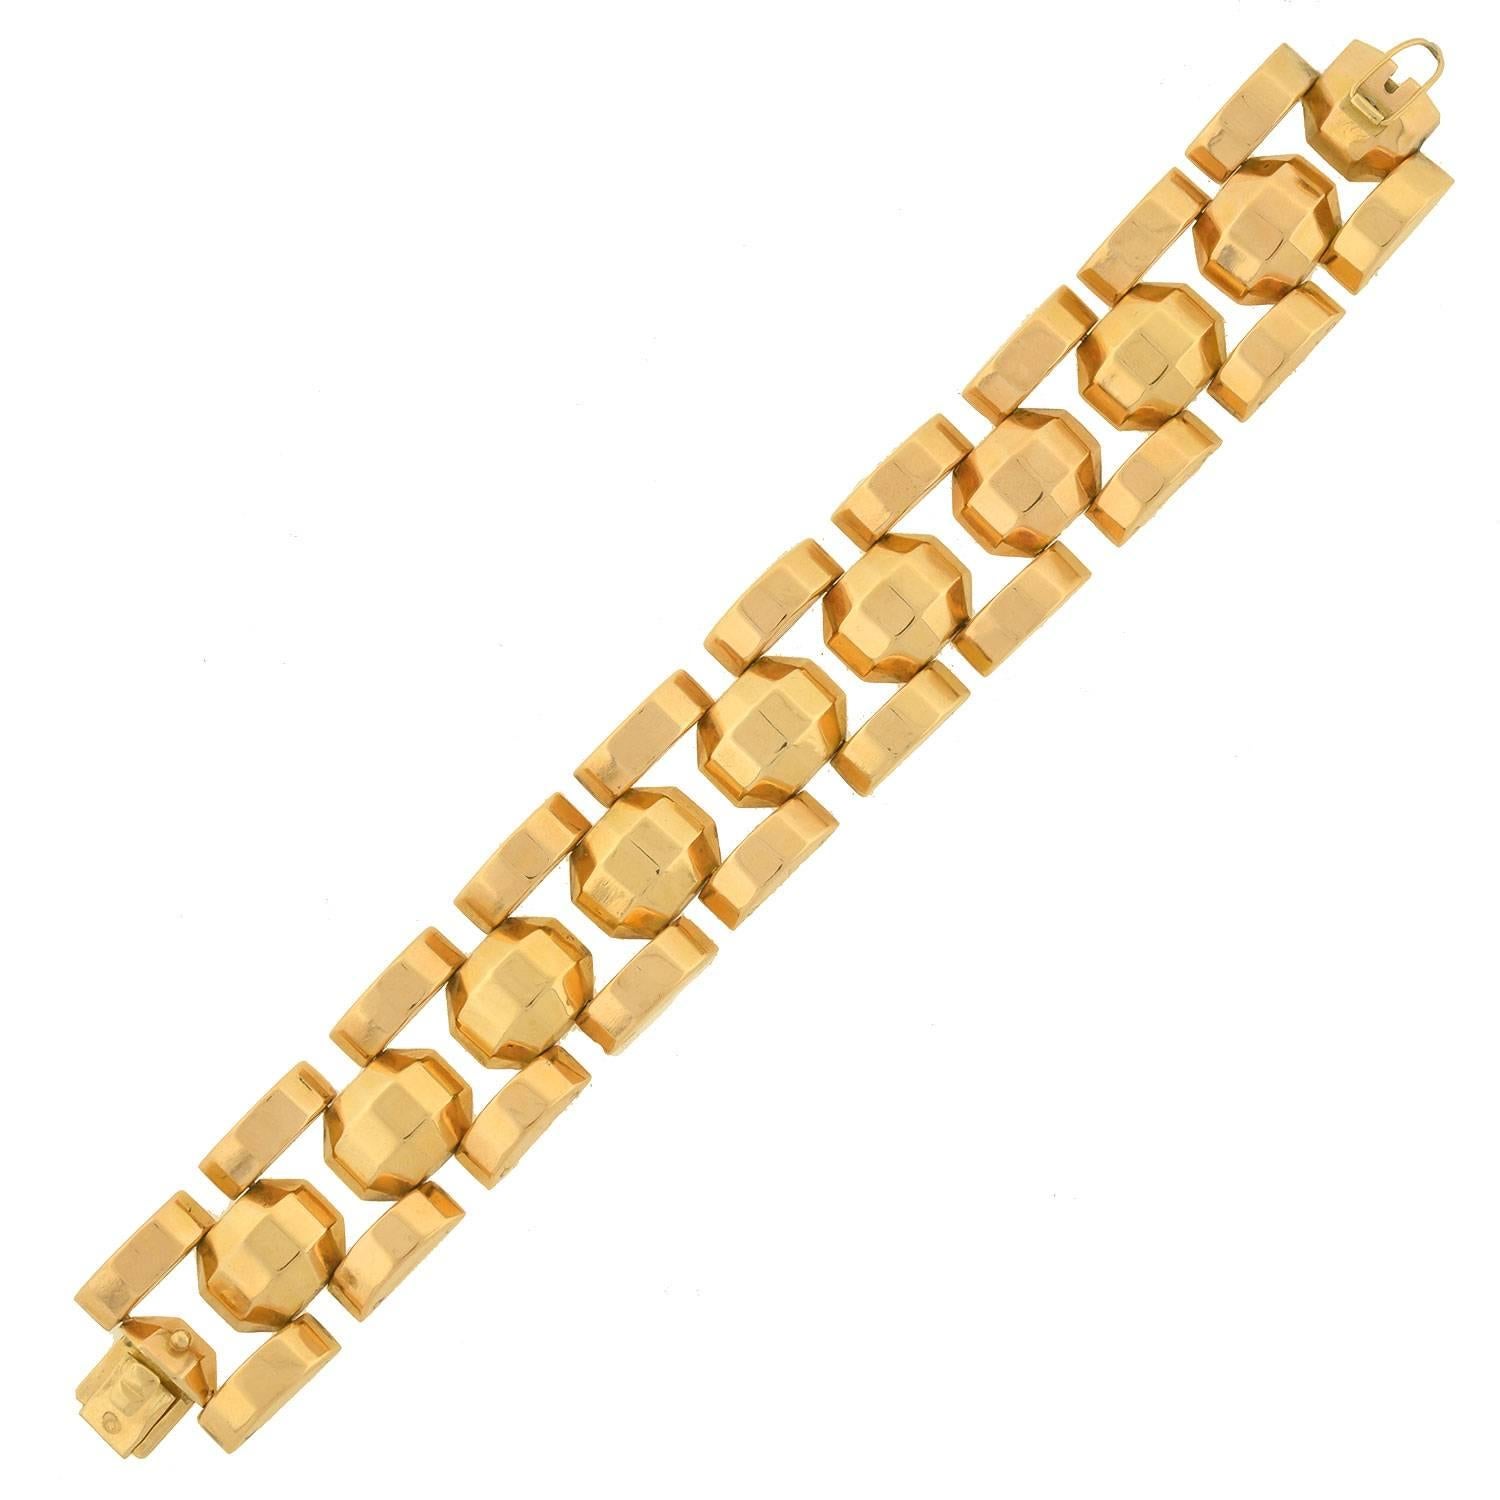 A fabulous gold tire track link bracelet from the Retro (ca1940) era! This hefty, bold looking piece is made of 18kt yellow gold and is French in origin. The design is comprised of 3 rows of links which have a faceted surface that catches the light